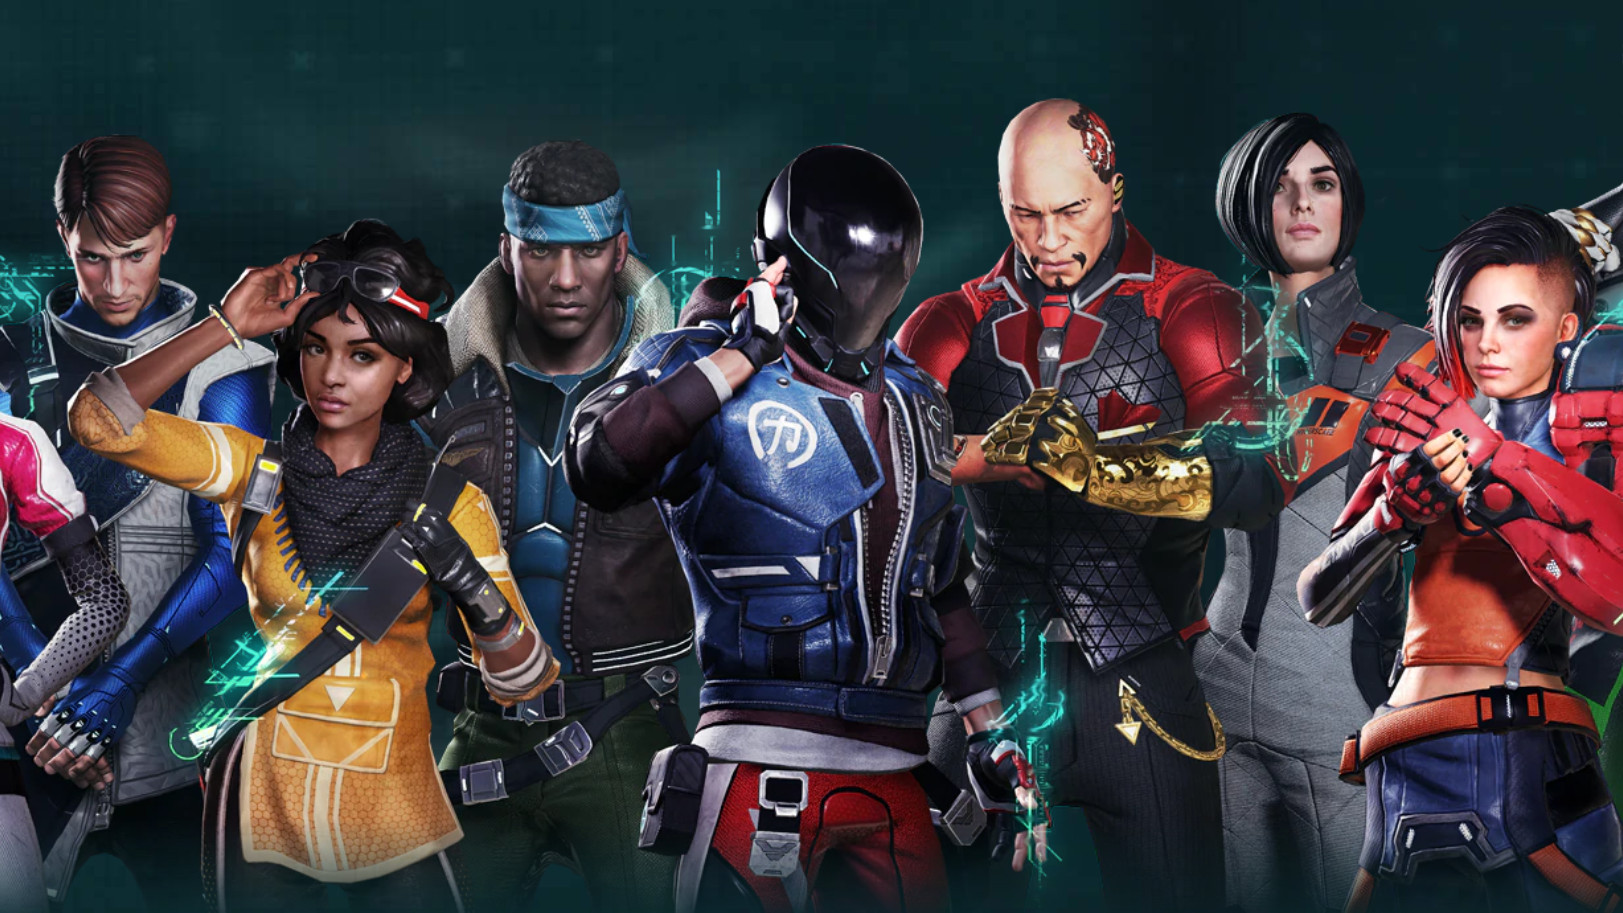 Bored of Warzone or Apex Legends? You can now play Ubisoft’s battle royale Hyper Scape on PC